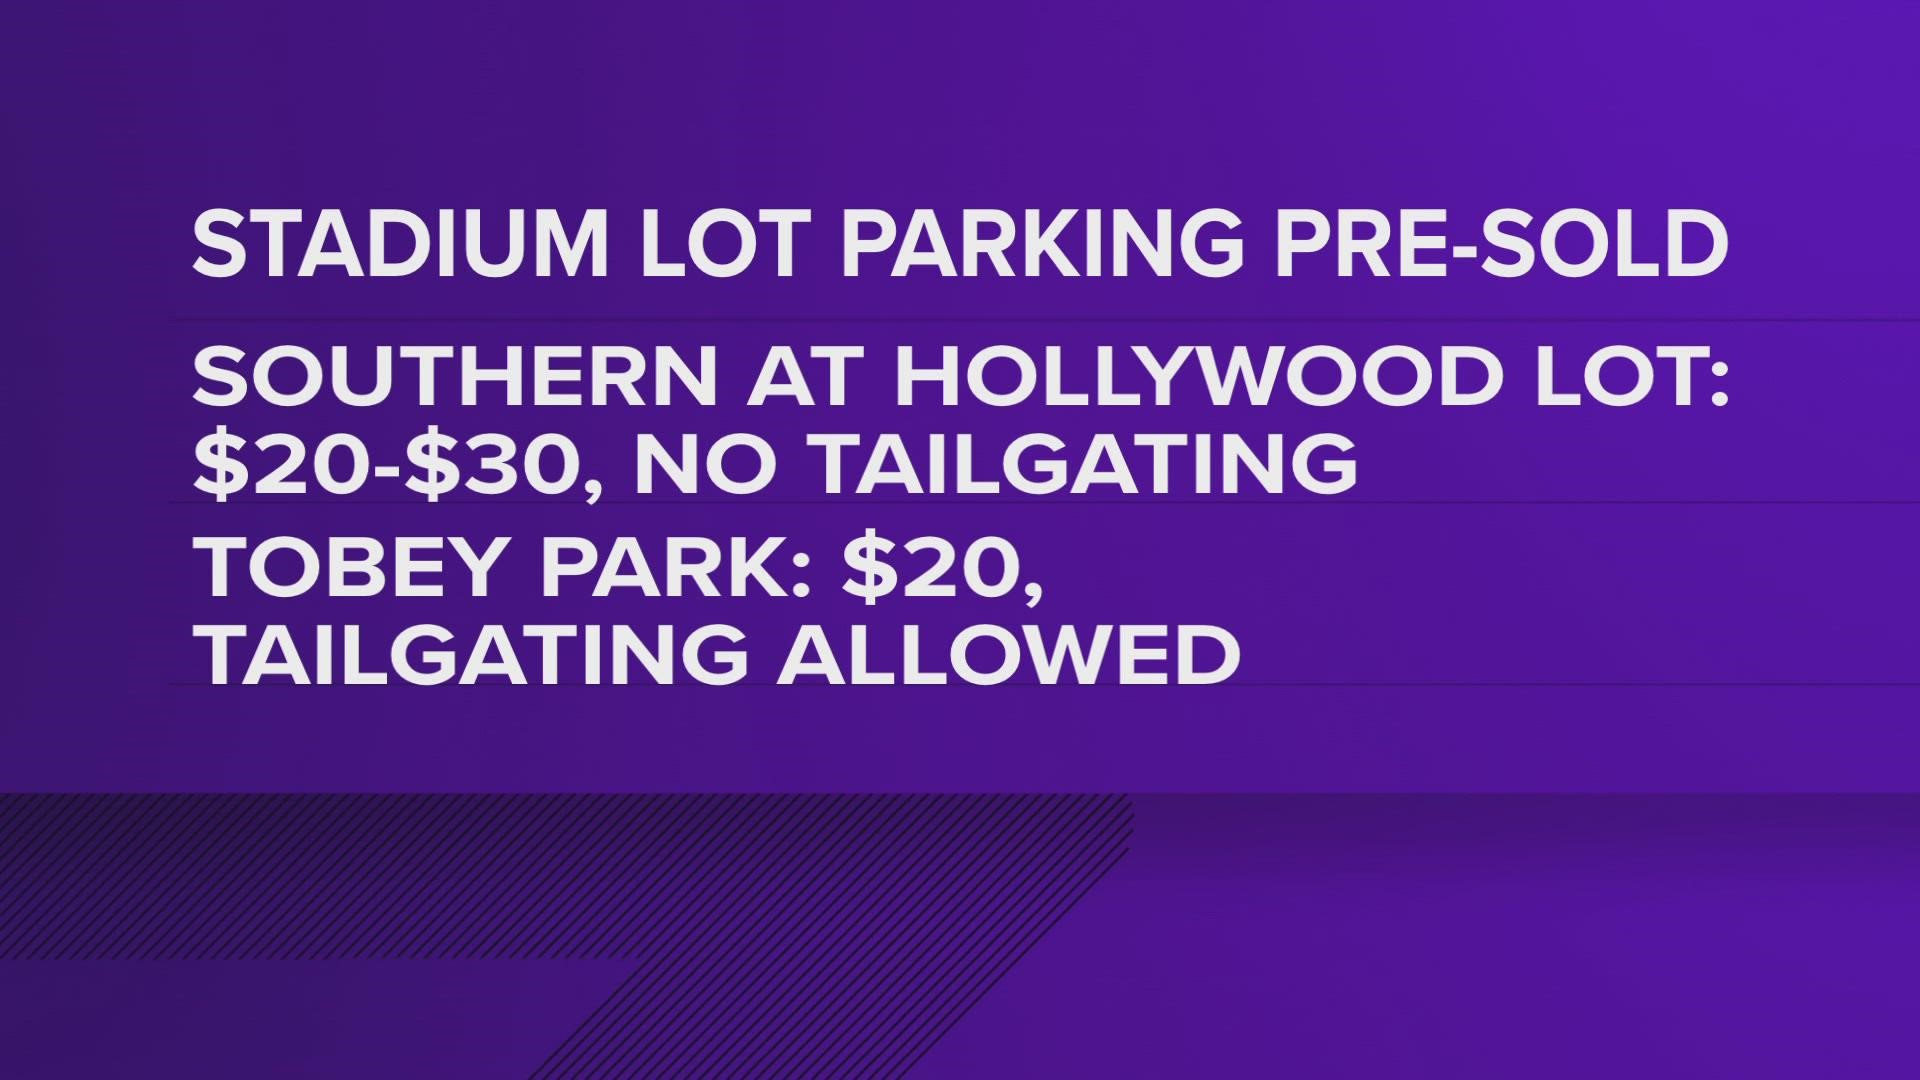 Tailgating is permitted in designated lots for the Southern Heritage Classic.